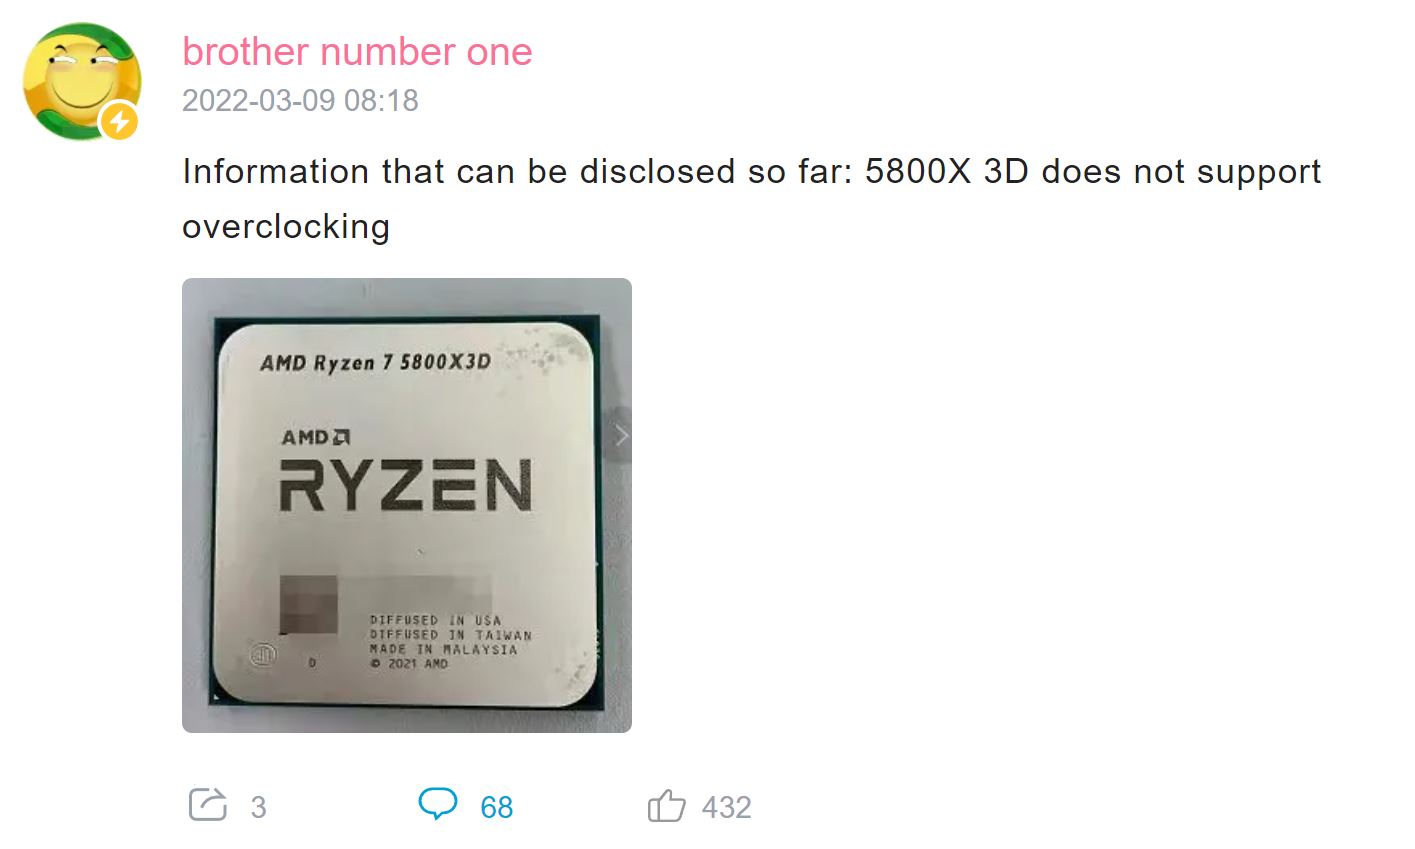 AMD Ryzen 7 5800X3D reportedly does not support overclocking (yet?) 